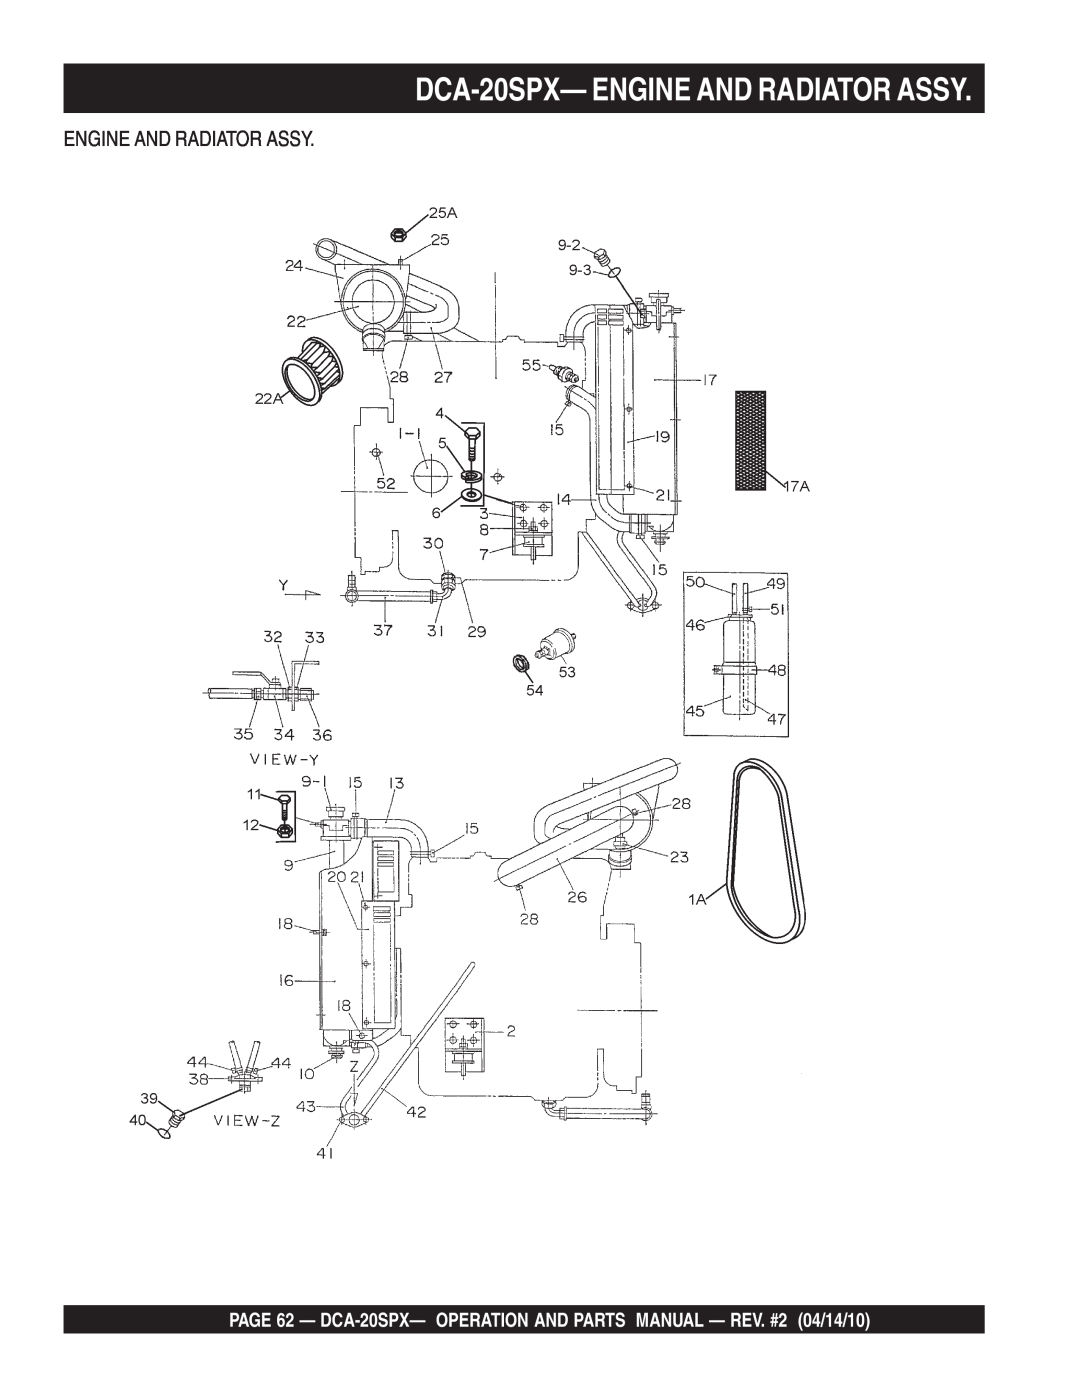 Multiquip operation manual DCA-20SPX- ENGINE AND RADIATOR ASSY, Engine And Radiator Assy 